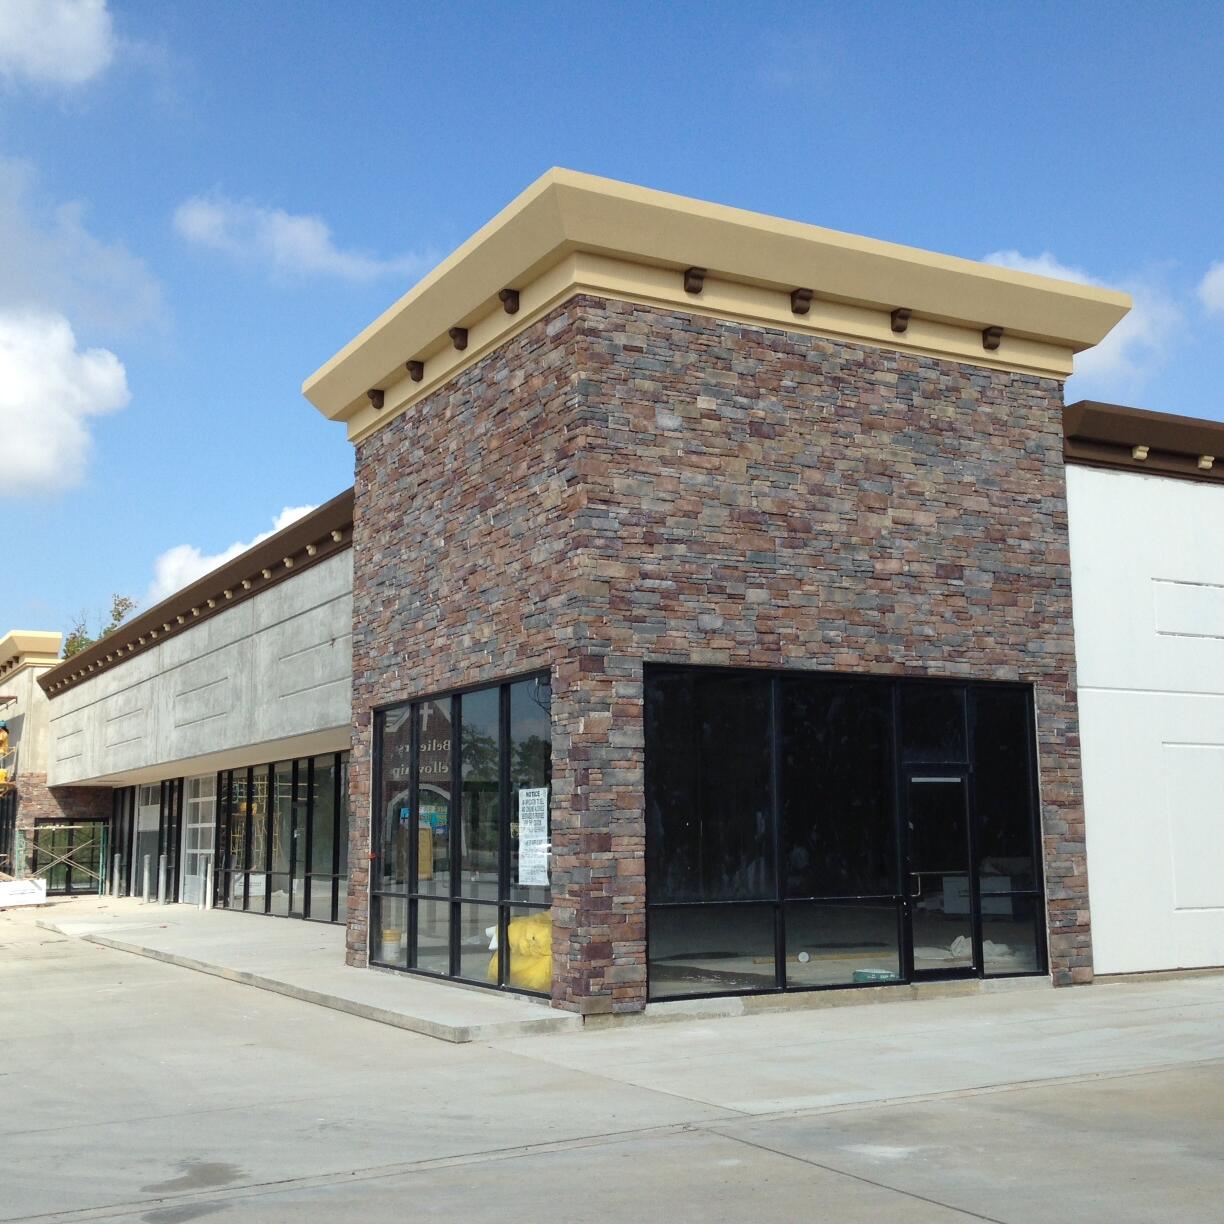 Retail Plaza investment property sold in Houston